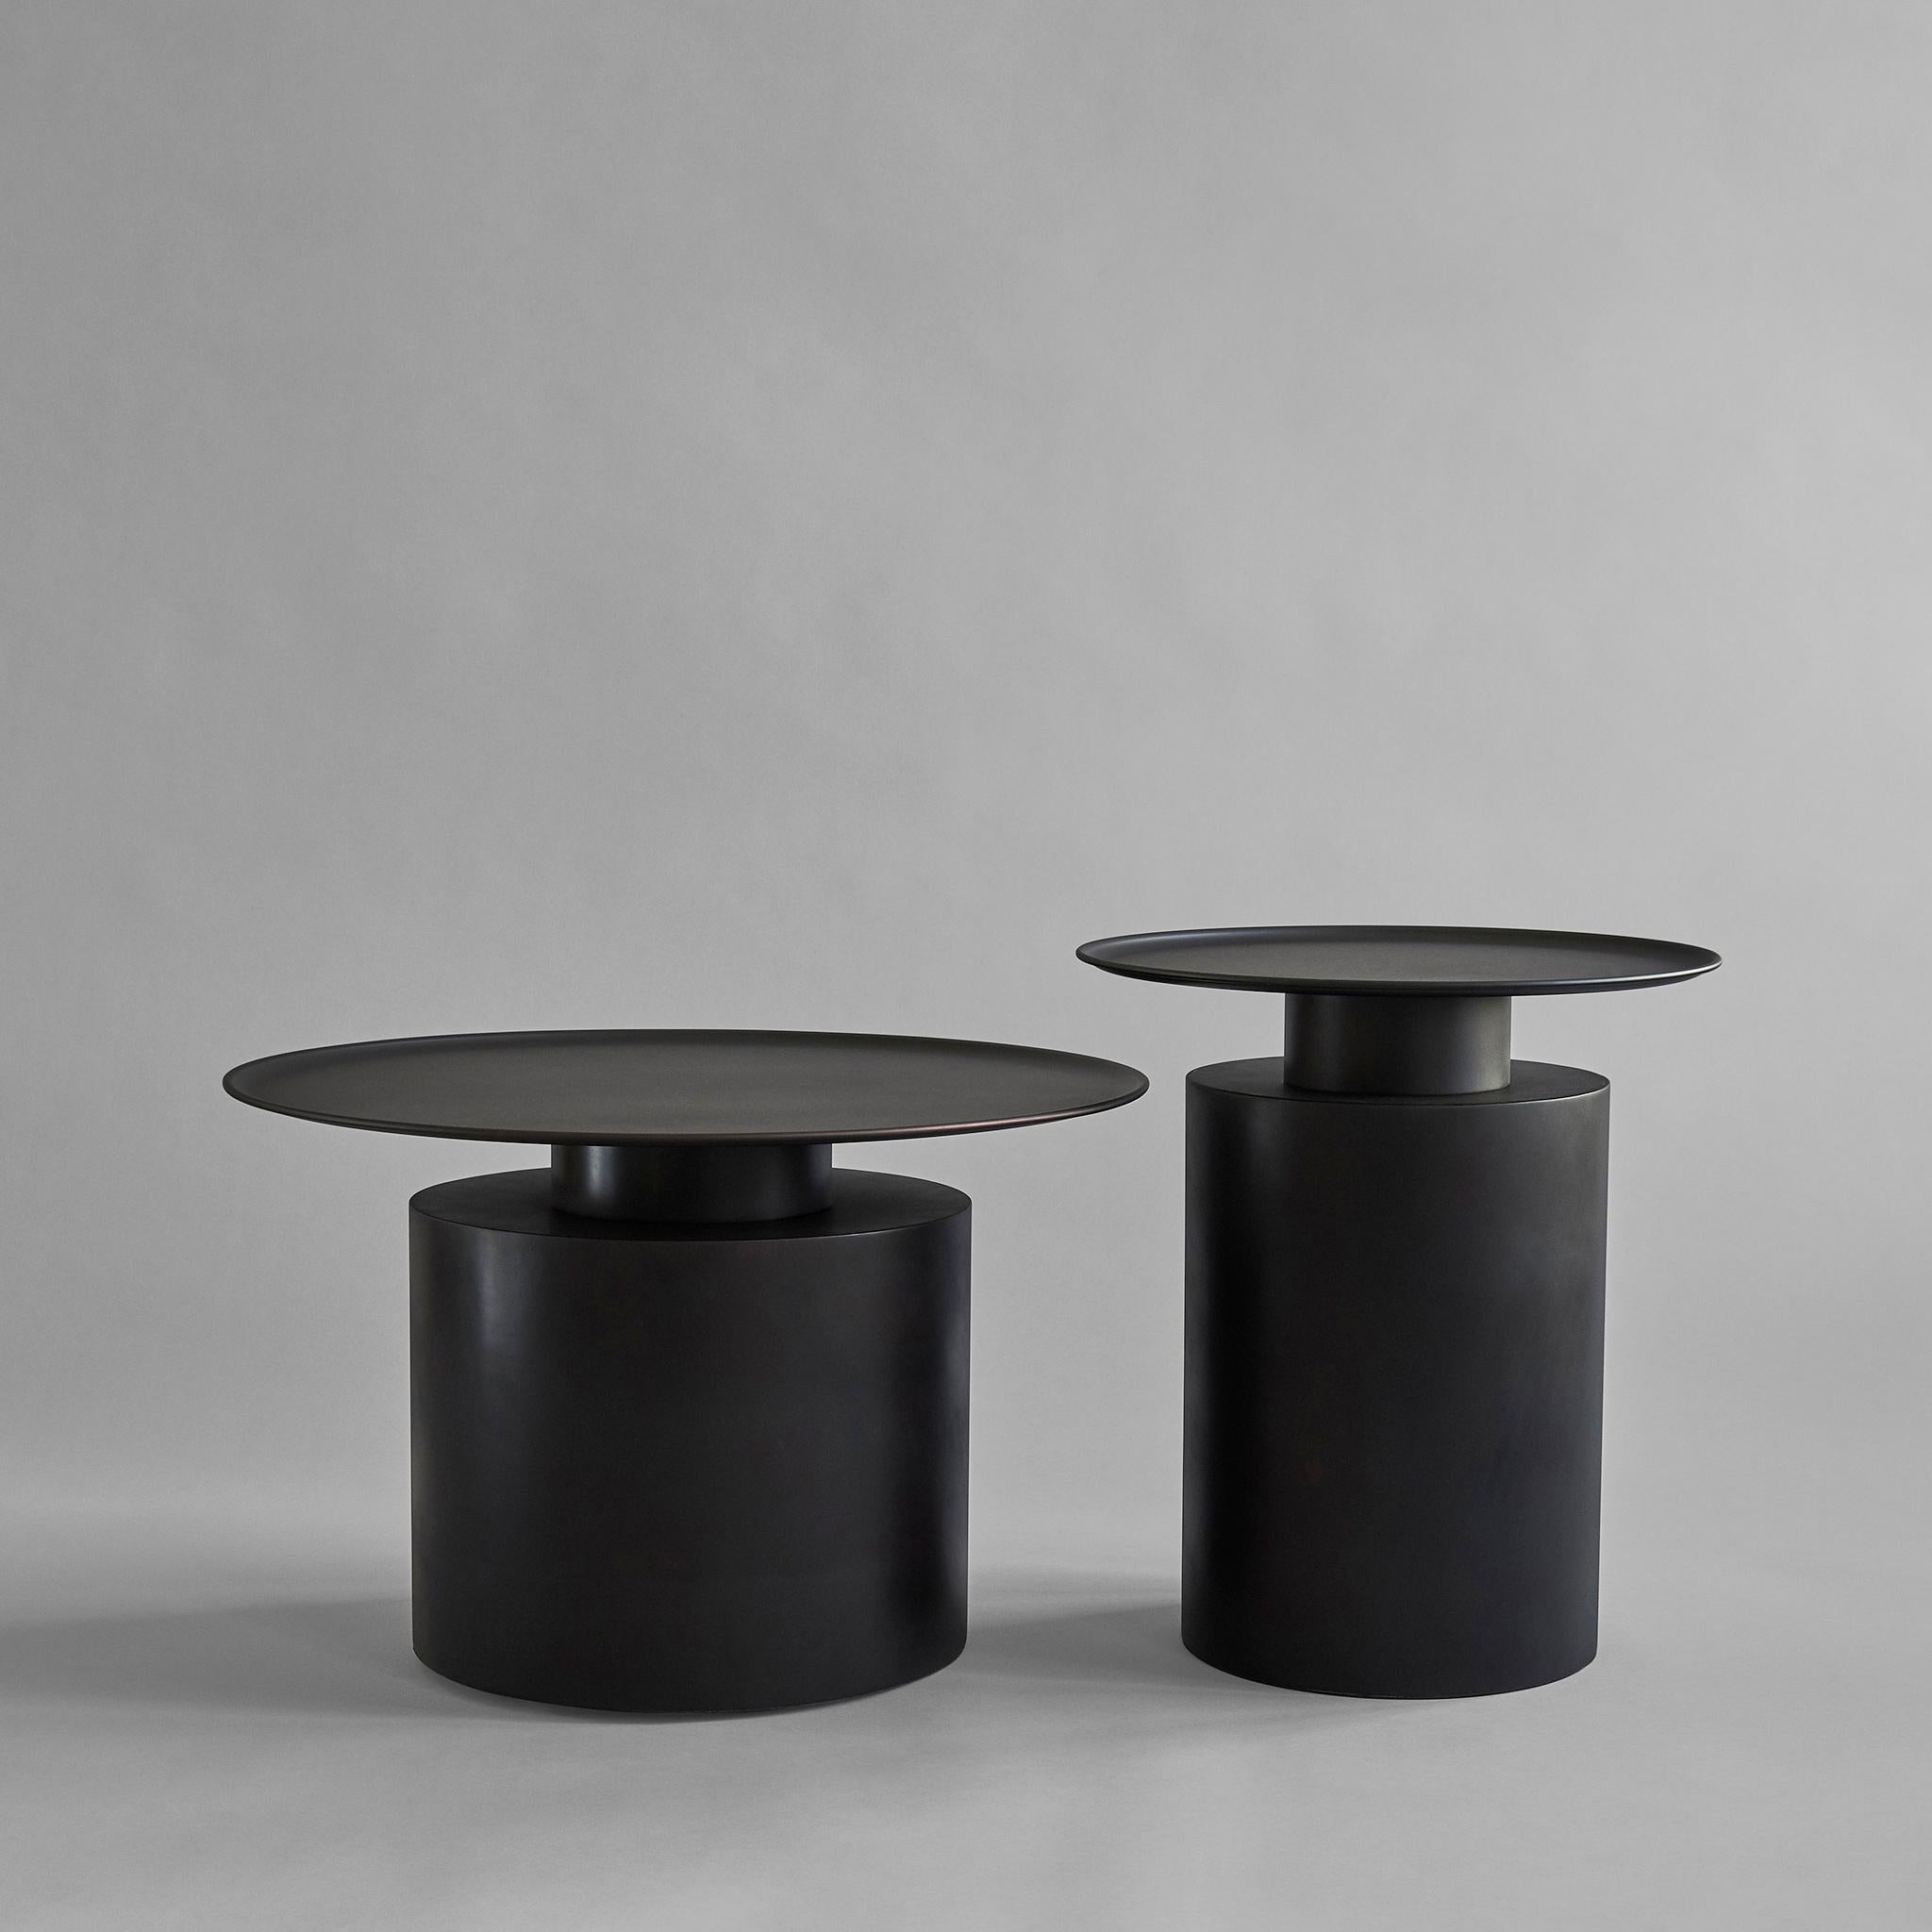 Burned black pillar table tall by 101 Copenhagen
Designed by Kristian Sofus Hansen & Tommy Hyldahl
Dimensions: L 50 / W 45 /H 45 CM
Materials: Plated metal

Pillar is inspired by the rich lustrous use of material in the 1930´s Art Deco